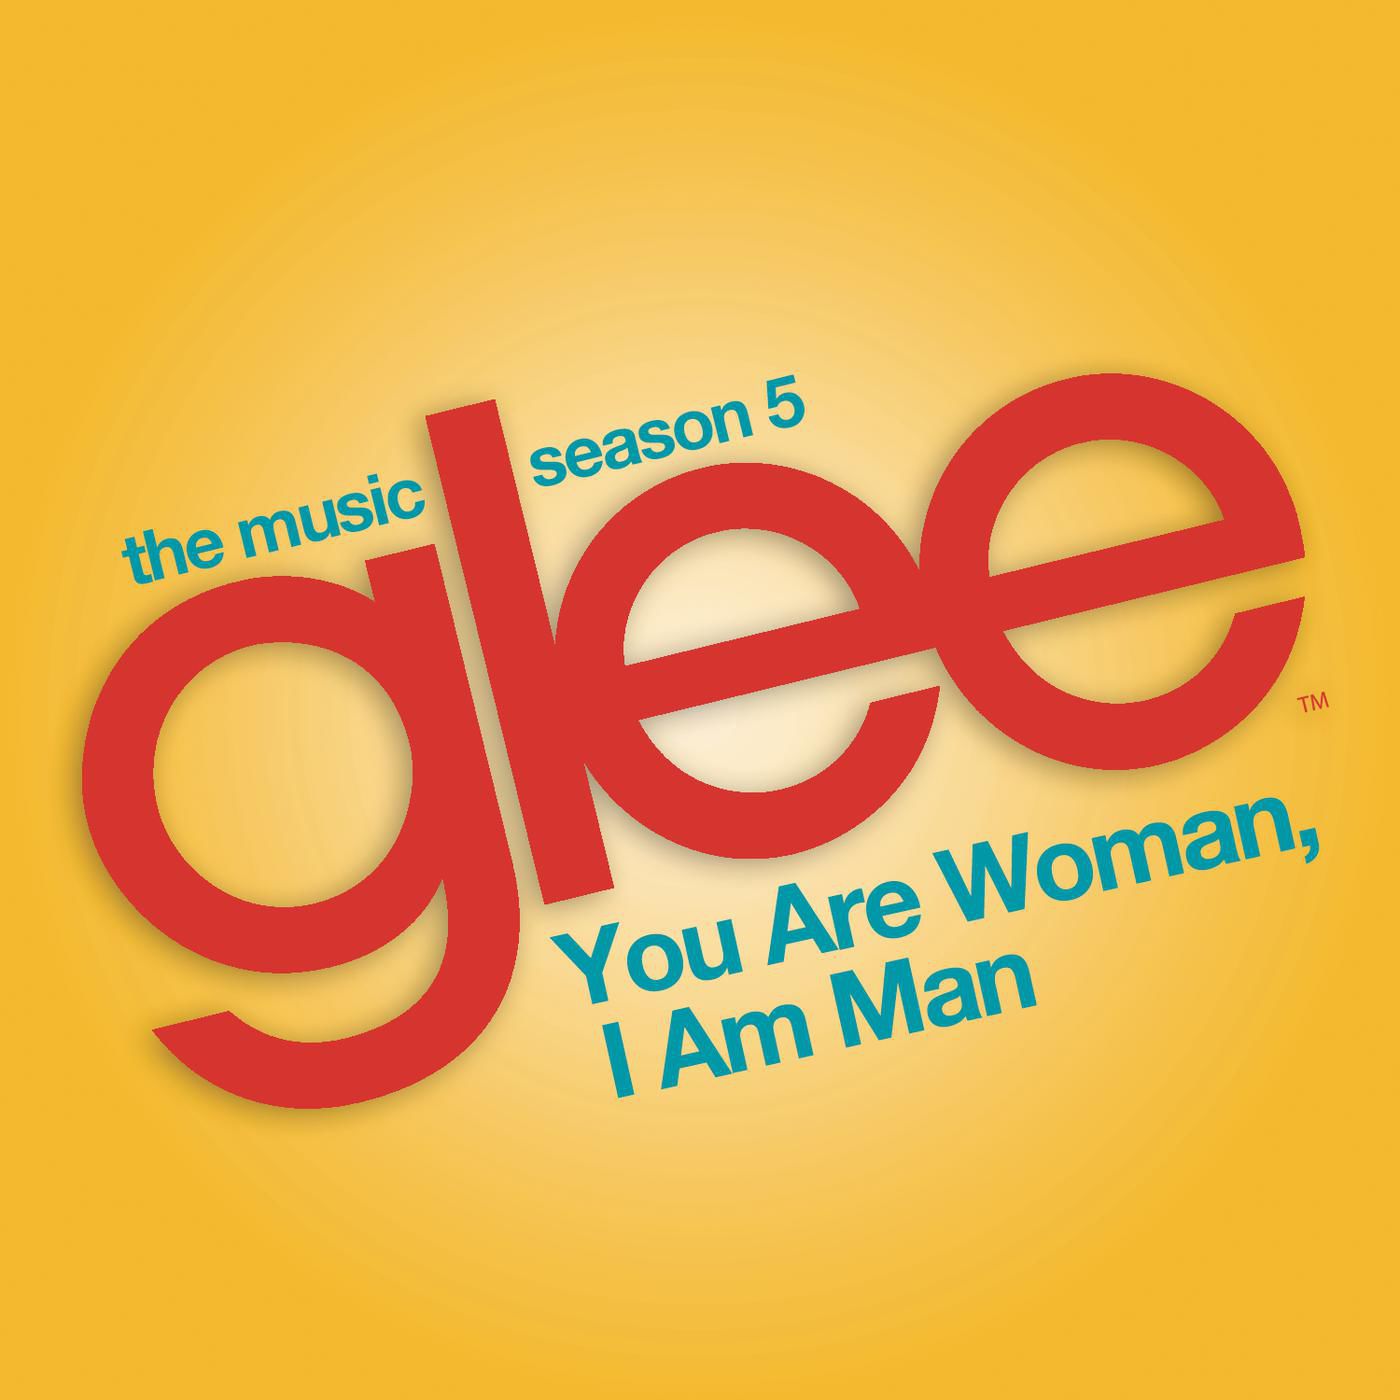 You are Woman, I am Man (Glee Cast Version)